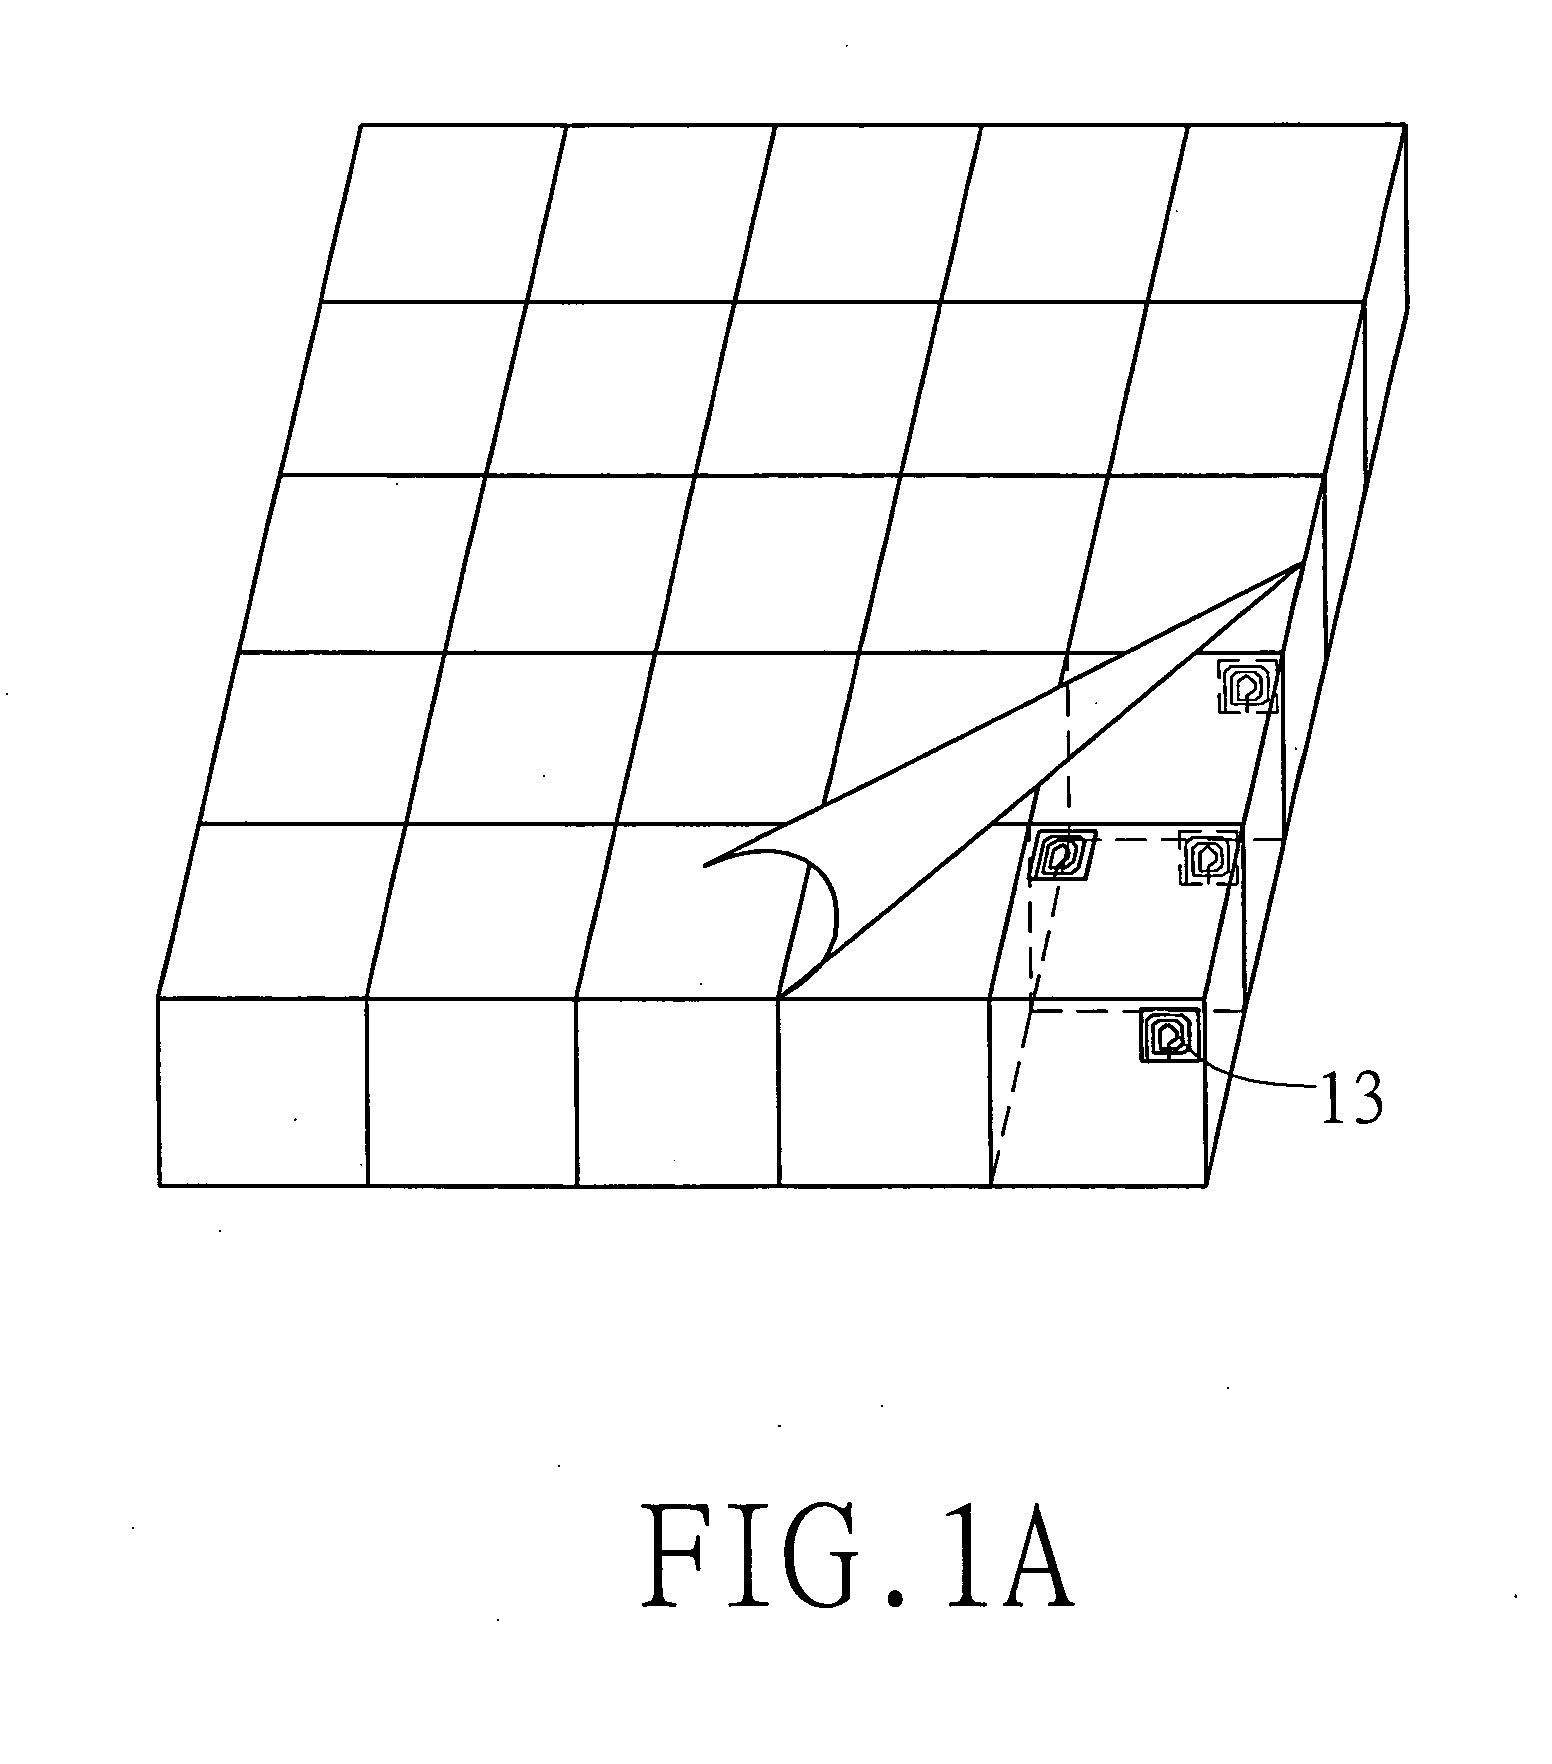 Multi-dimensional antenna in RFID system for reading tags and orientating multi-dimensional objects